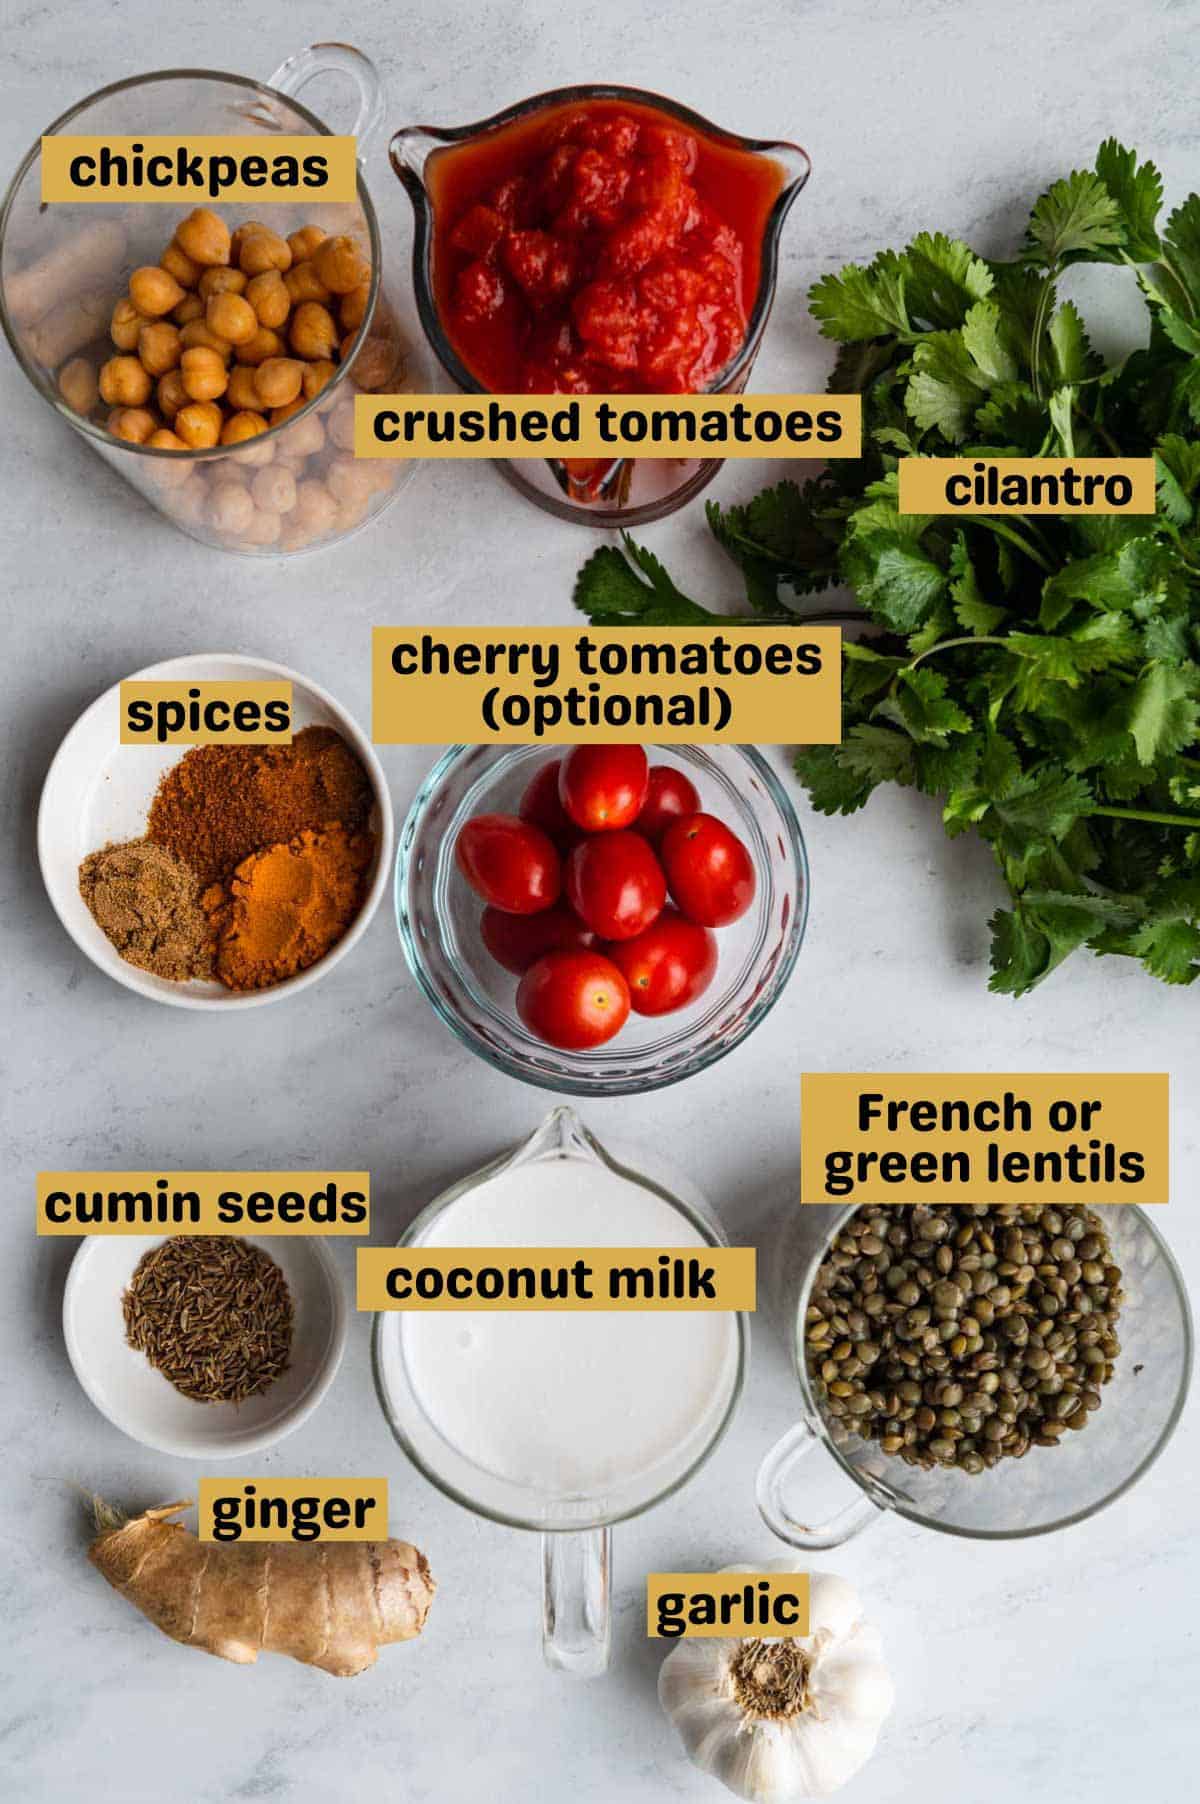 Chickpeas, crushed tomatoes, fresh cilantro, grape tomatoes, spices, cumin seeds, coconut milk, ginger root, garlic, and green lentils in glass containers on a white marble board.